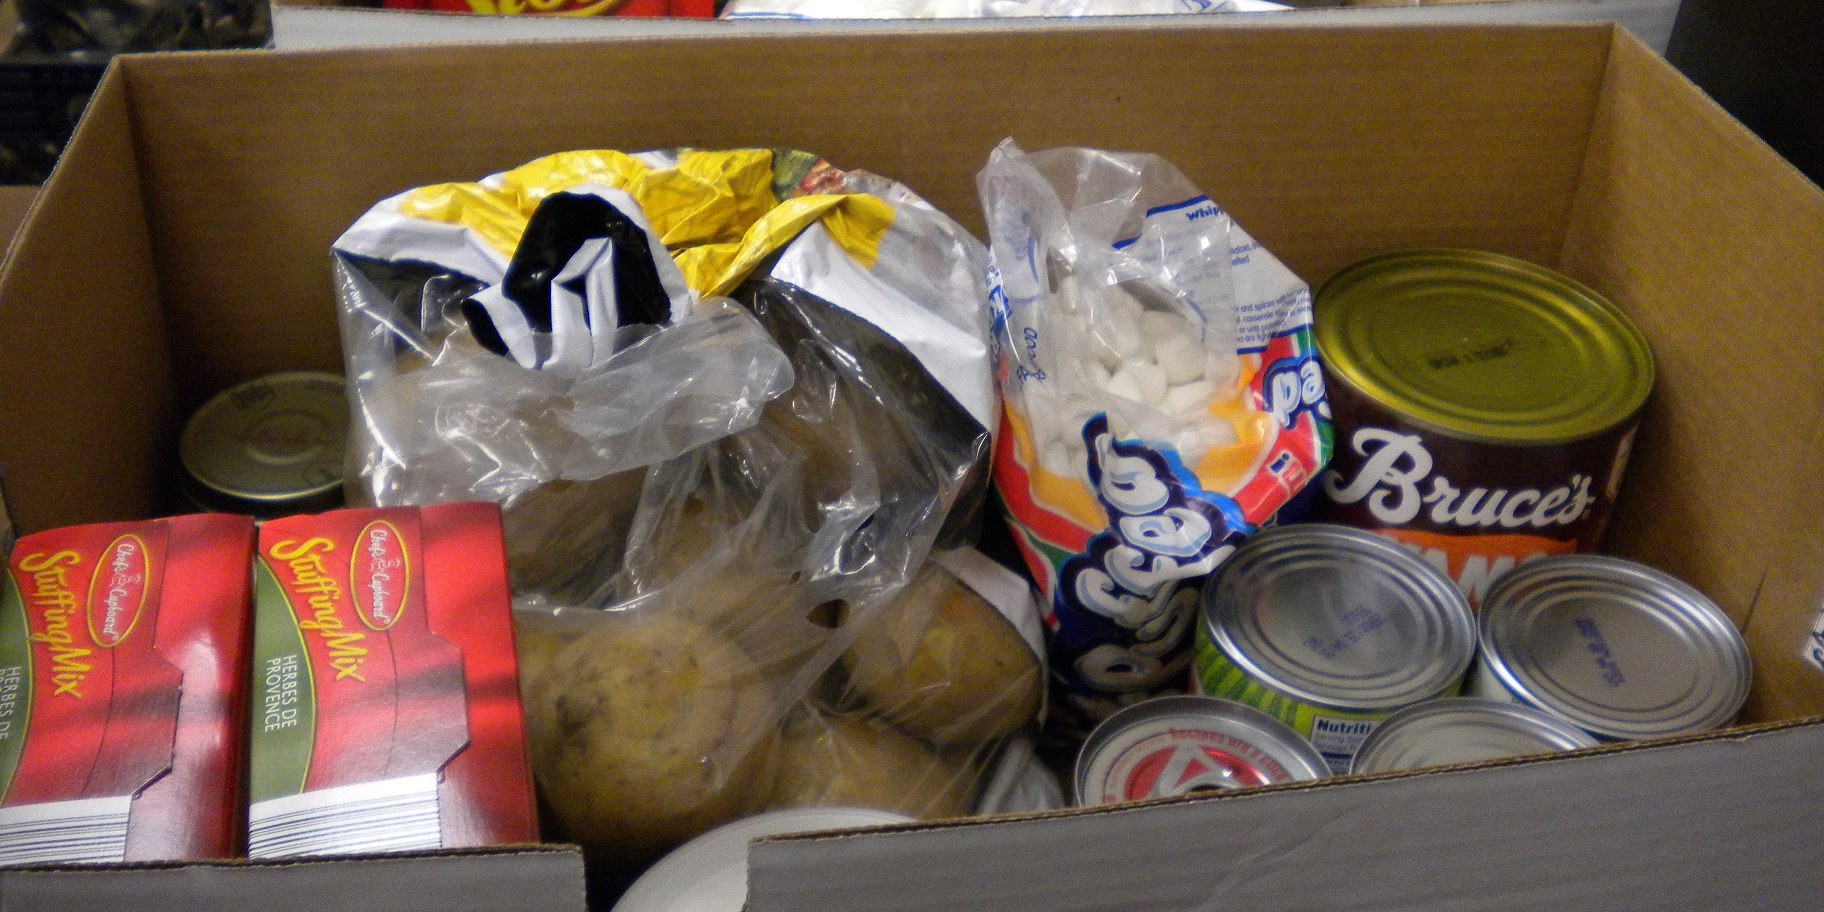 Just some of the food collected.